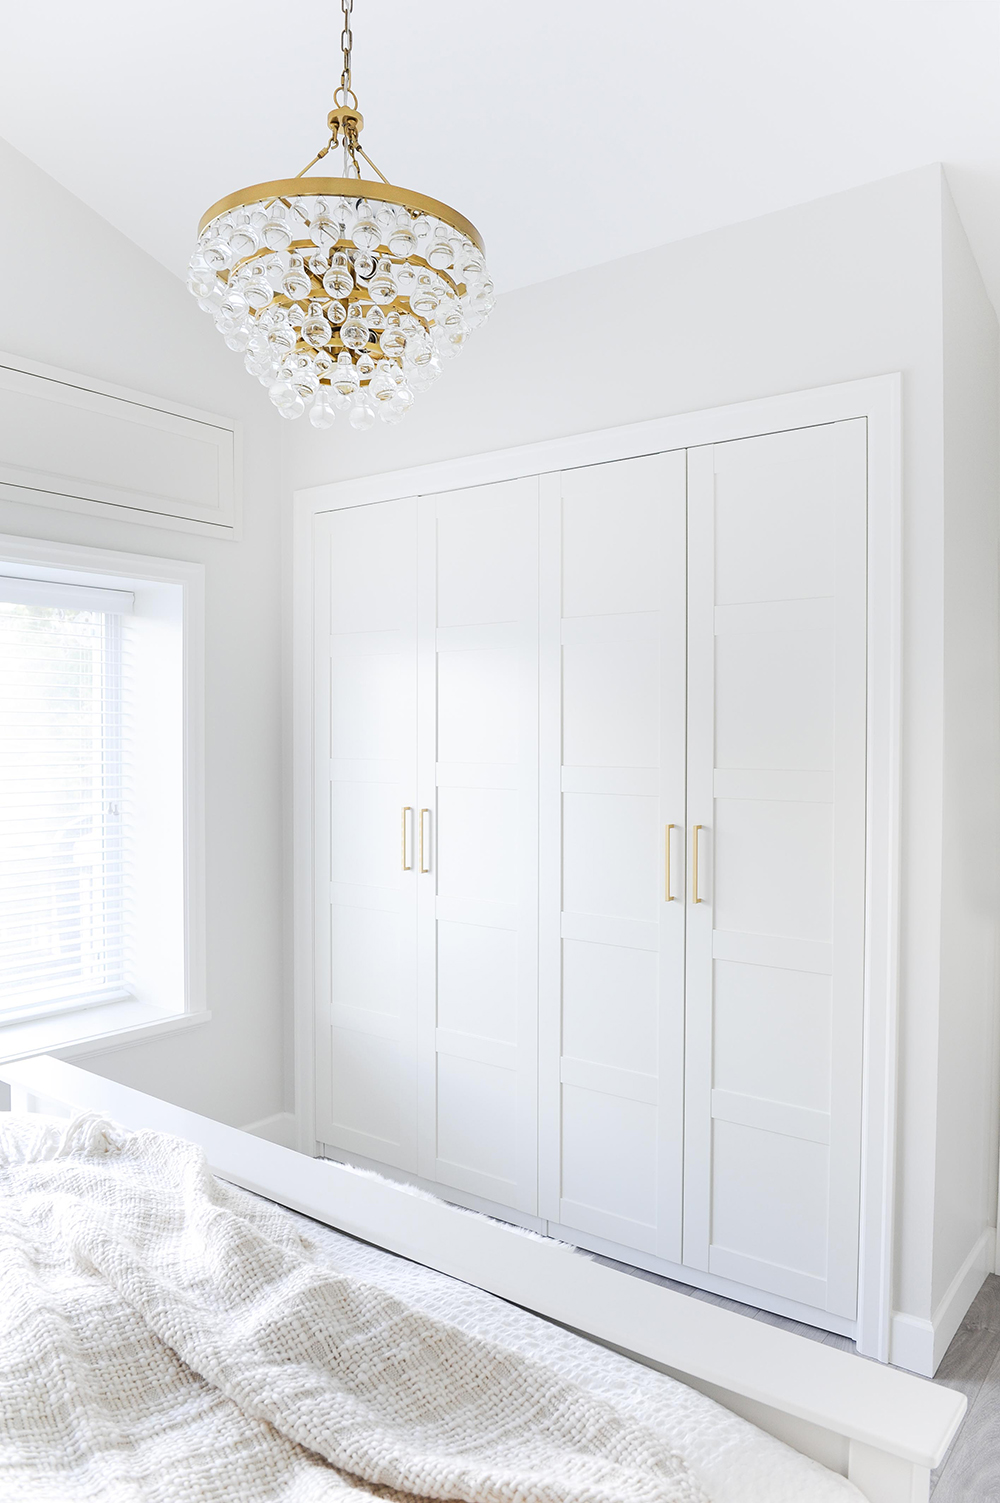 This budget-friendly closet was given the high-end treatment.